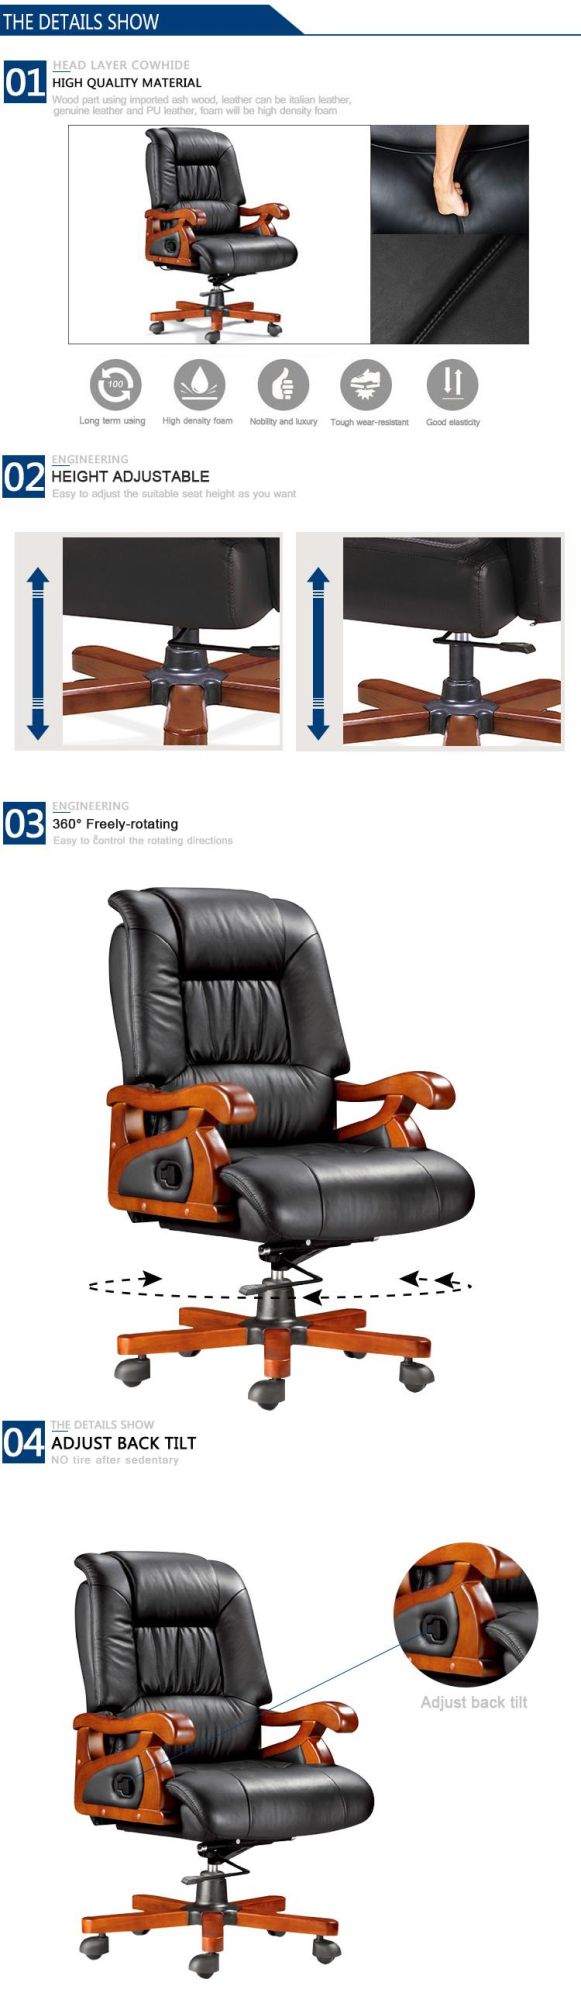 Genuine Leather Material Italian Leather Executive Office Chair